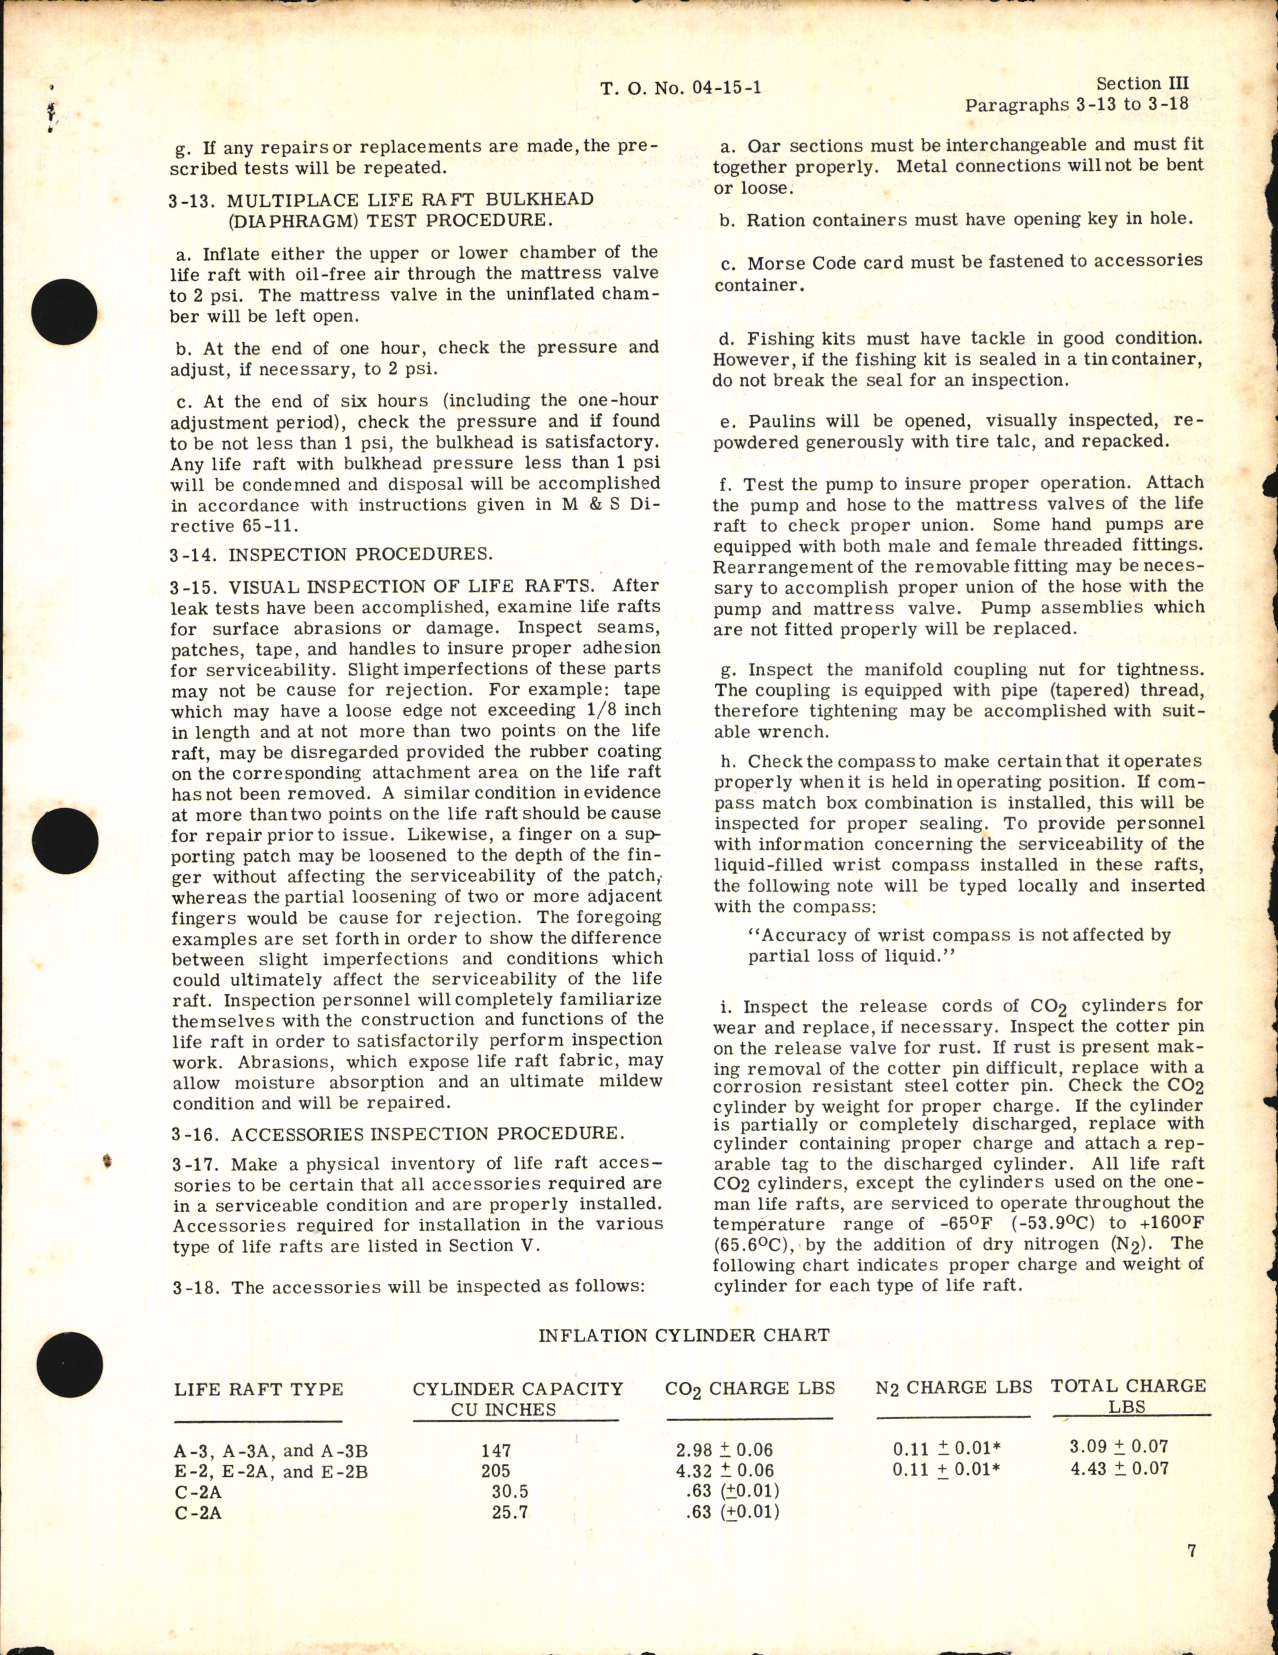 Sample page 5 from AirCorps Library document: Operation and Service Instructions with Accessory Parts List for Life Rafts